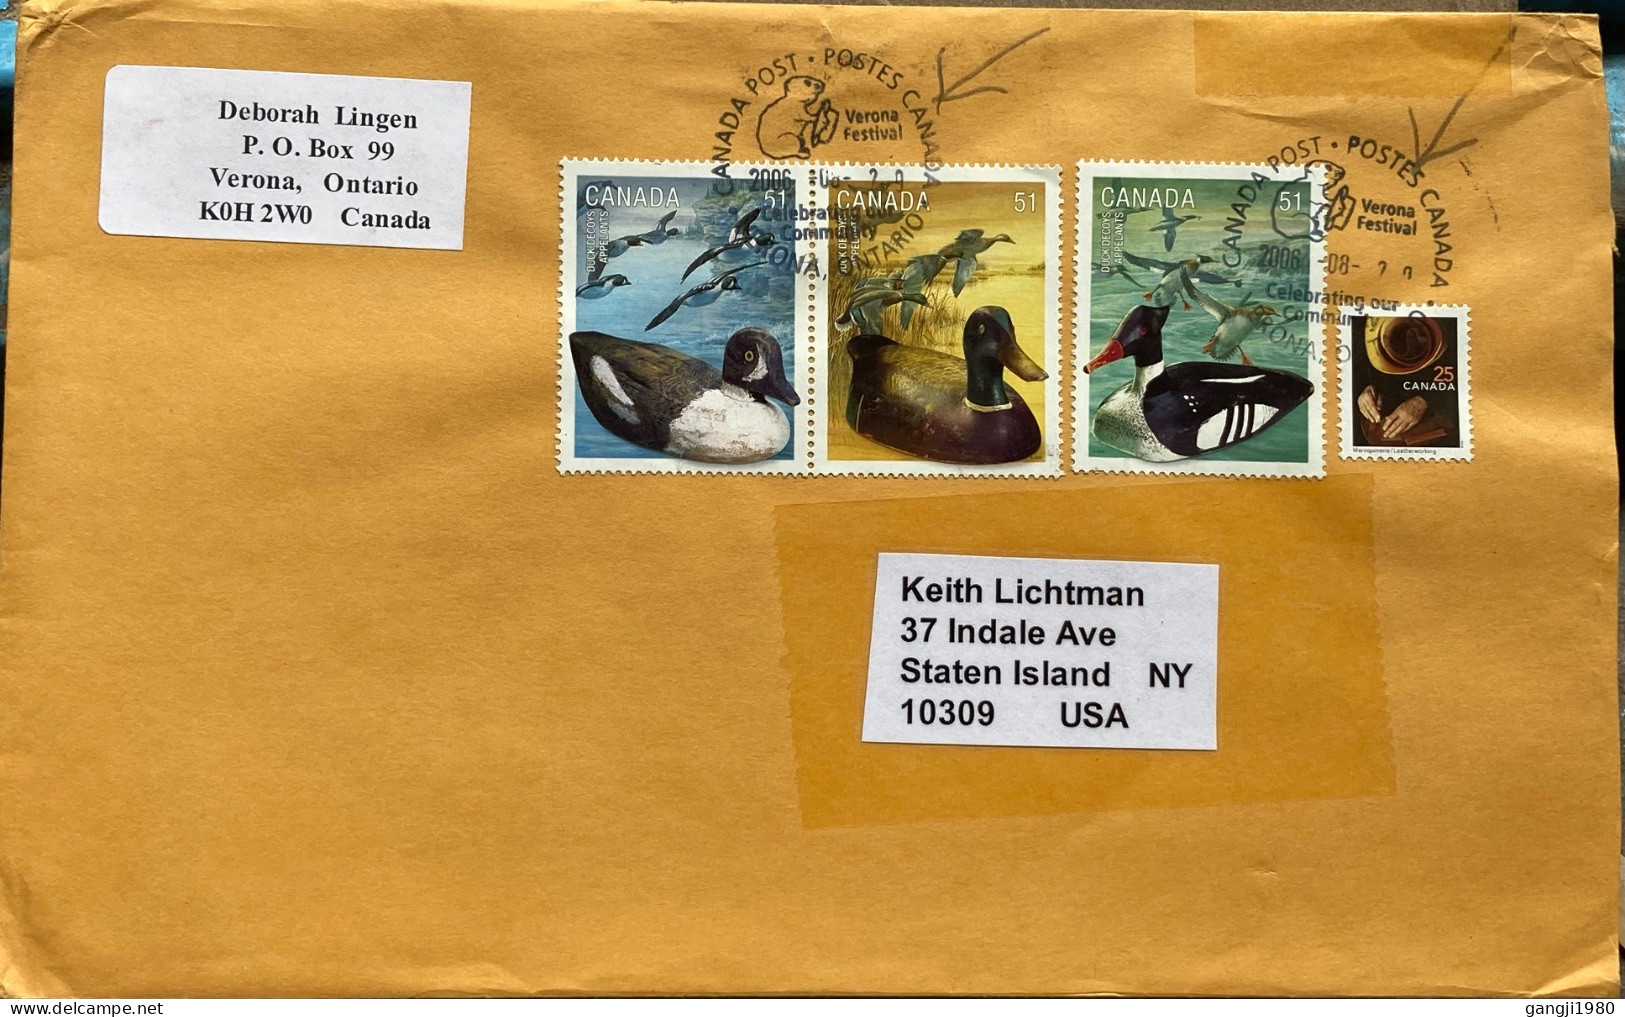 CANADA-2006, COVER USED TO USA, 4 BIRD DUCK STAMP, ANIMAL PICTURE CANCEL, VERON CITY FESTIVAL, CELEBRATING OUR COMMUNITY - Cartas & Documentos